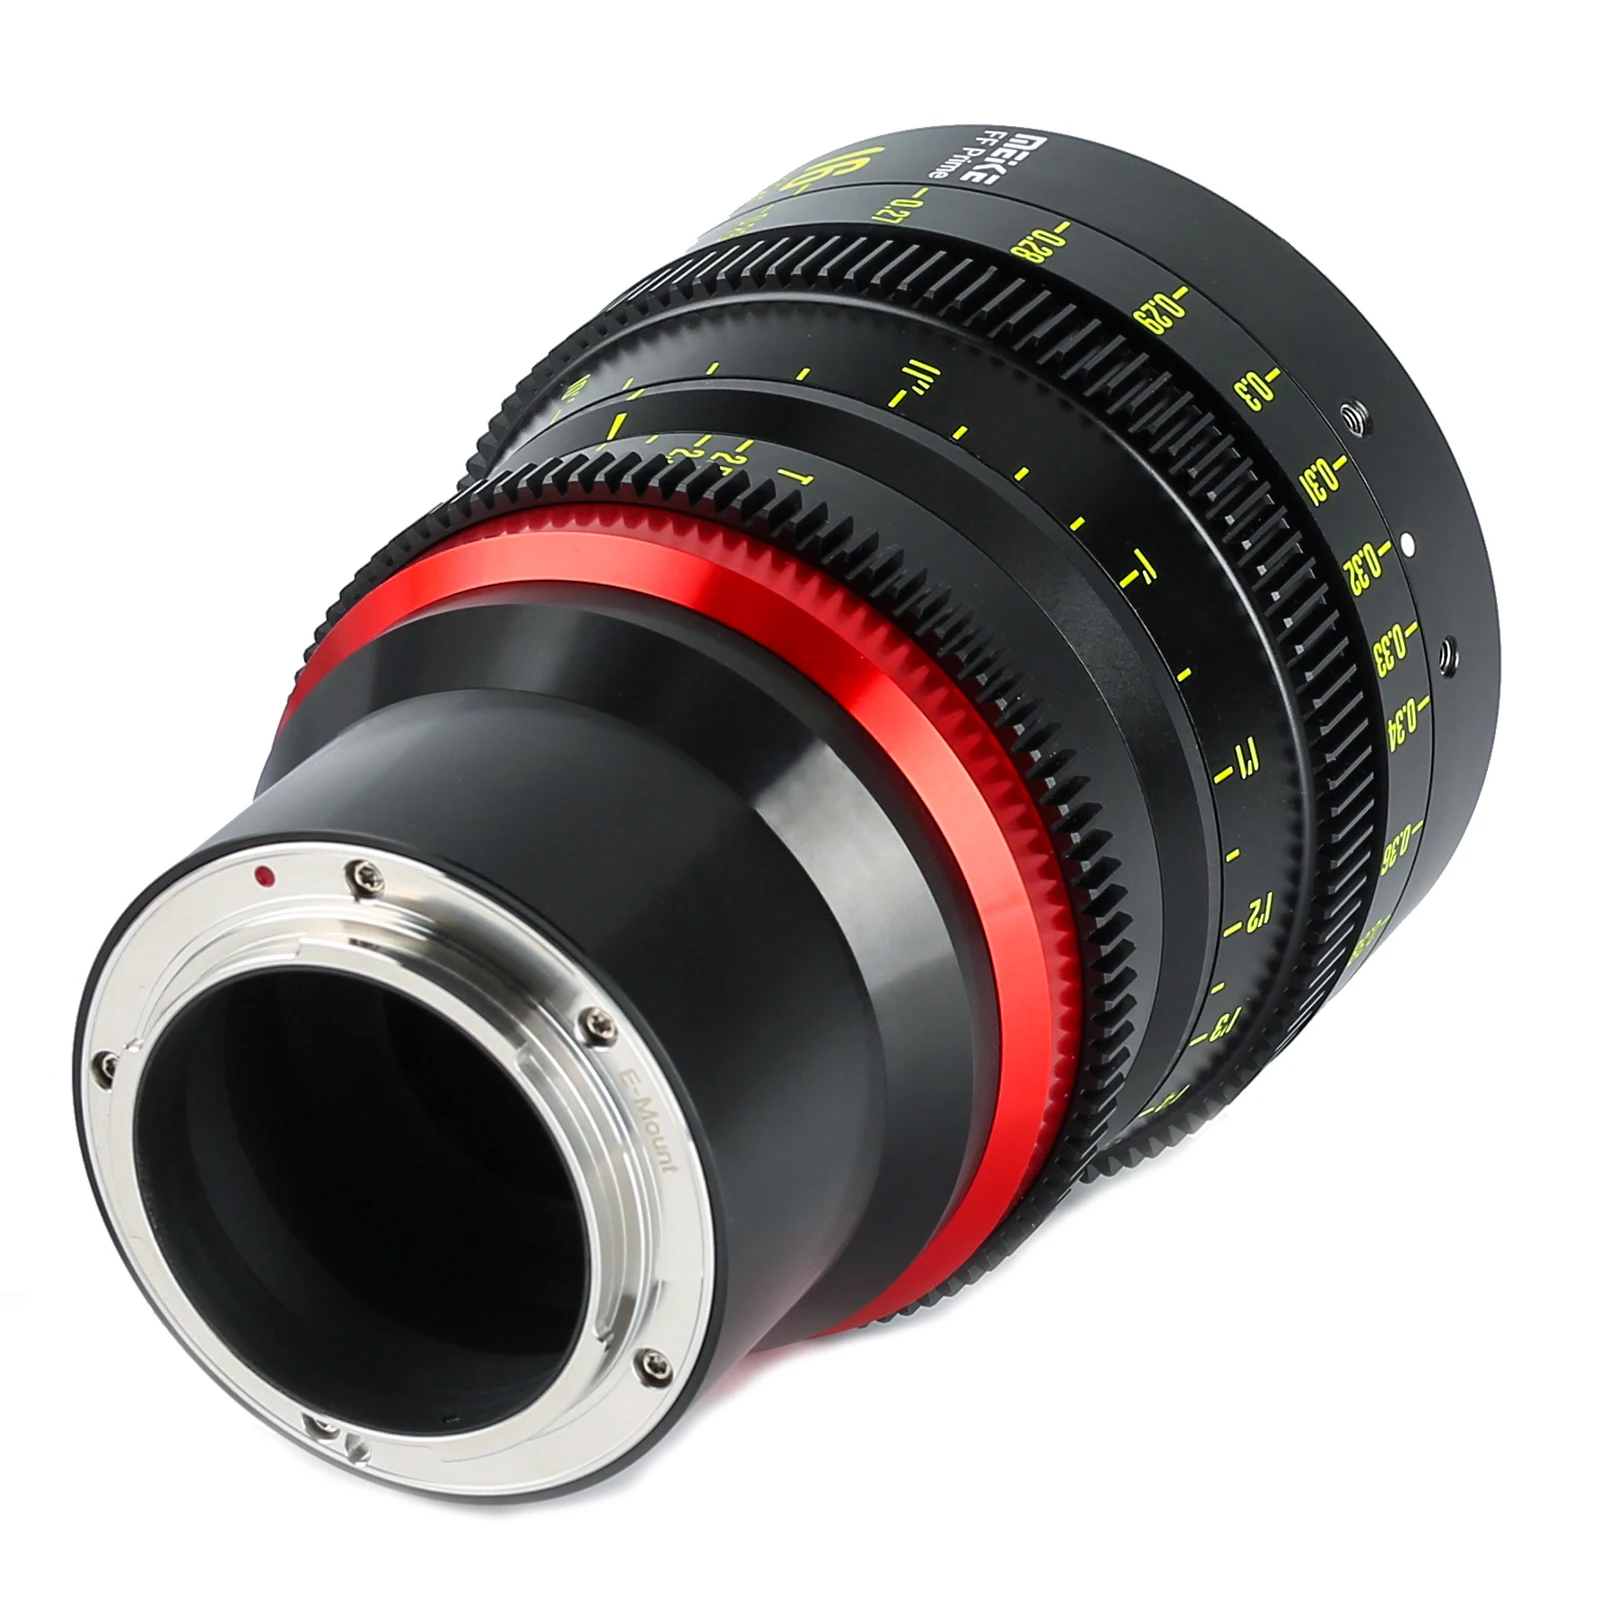 Meike Prime 16mm T2.5 Cine Lens for Full Frame Cinema Camera Systems,such as Canon C700 C500II,Sony VENICE,Sony FX3 FX6,FX9 images - 6